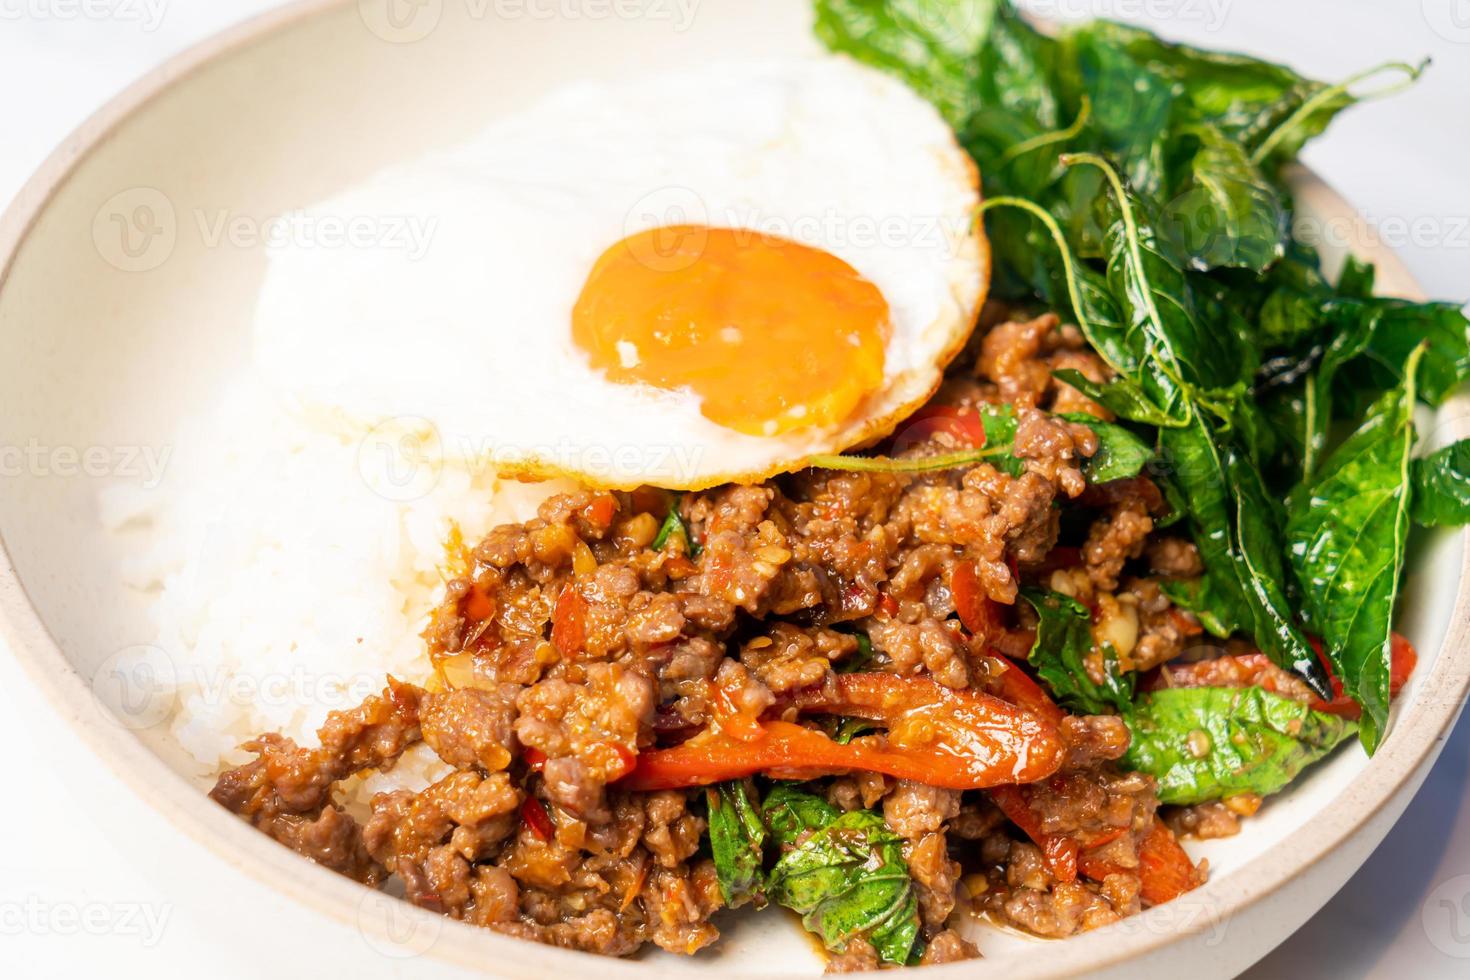 Stir fried Thai basil with wagyu beef and fried egg photo